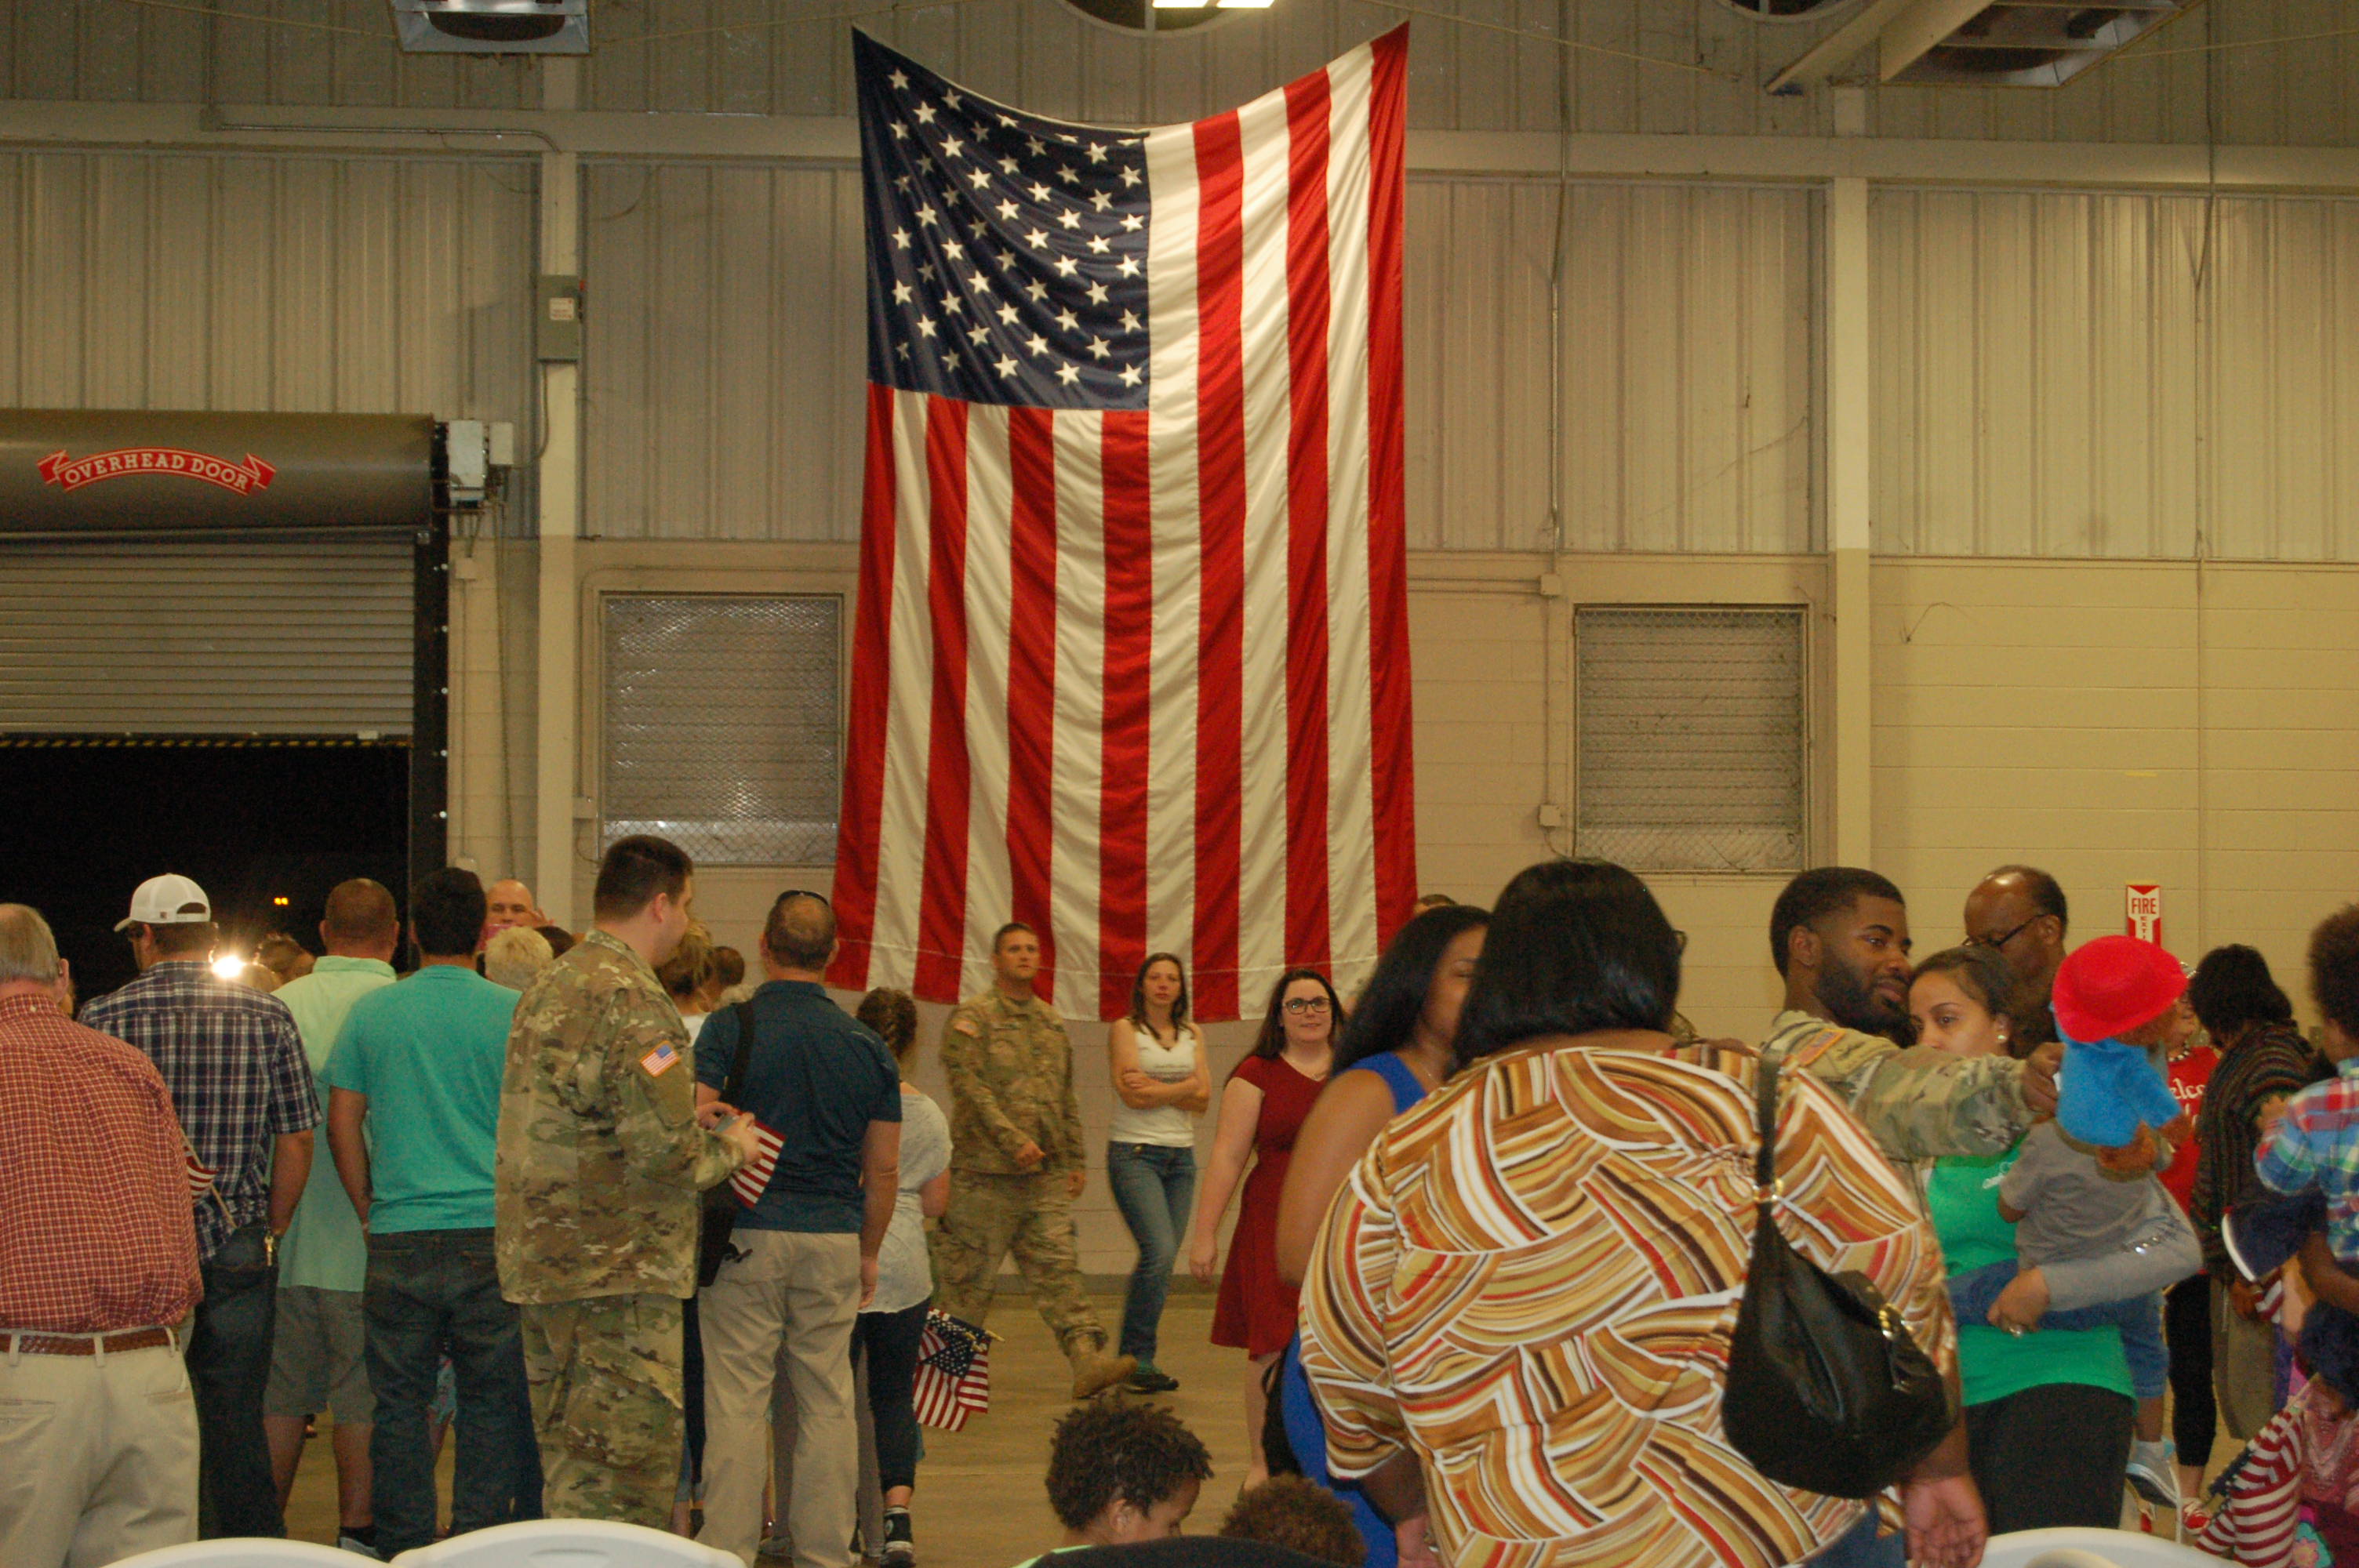 PHOTO GALLERY: Springville National Guard Armory welcomes unit back from deployment